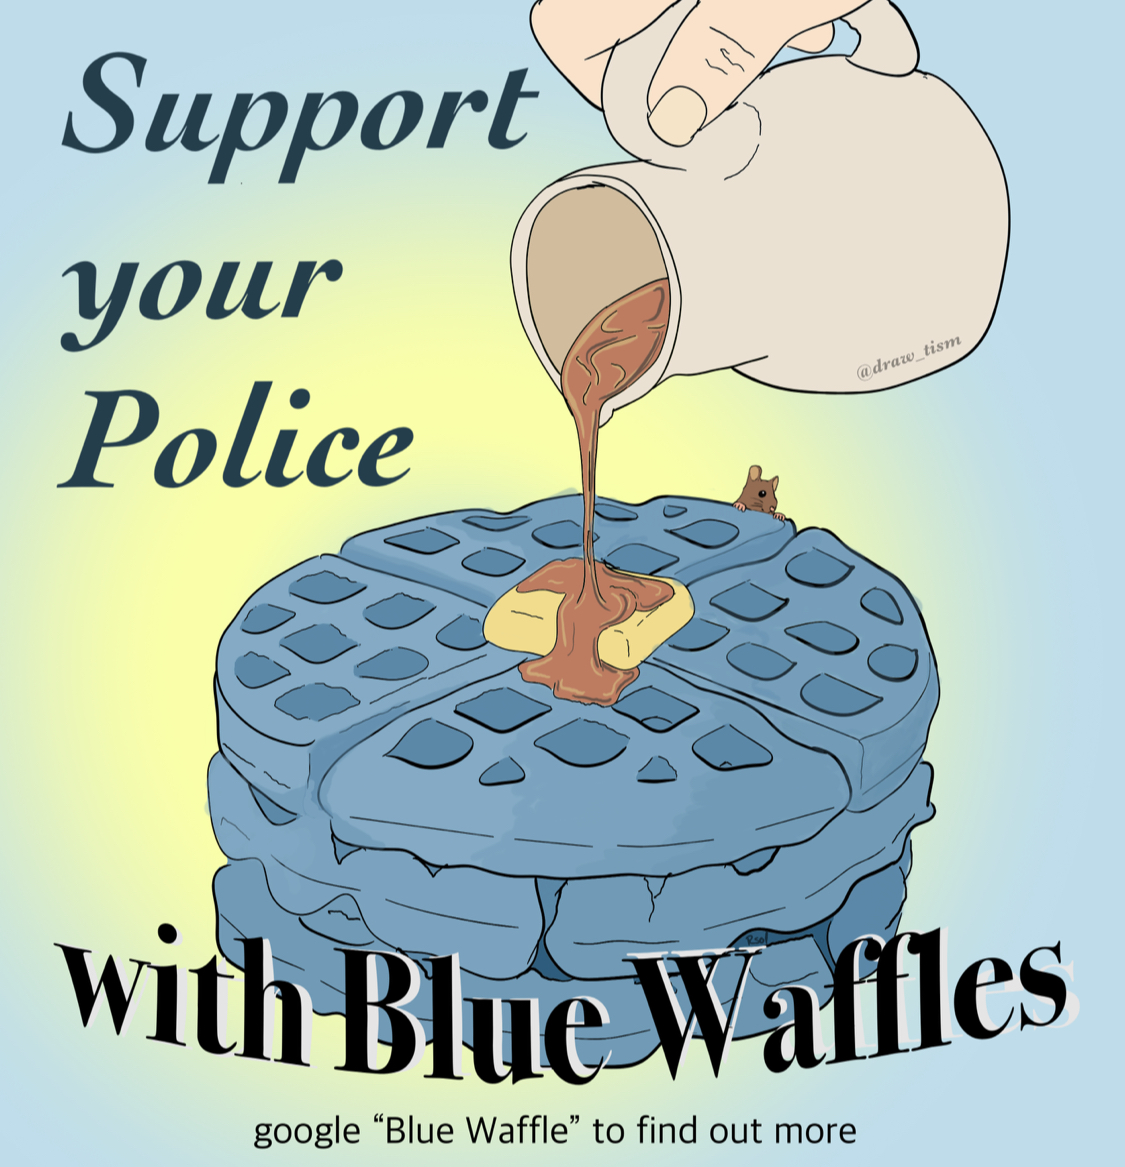 dreamweaver carpet - Supports your Police with Blue Wallies google